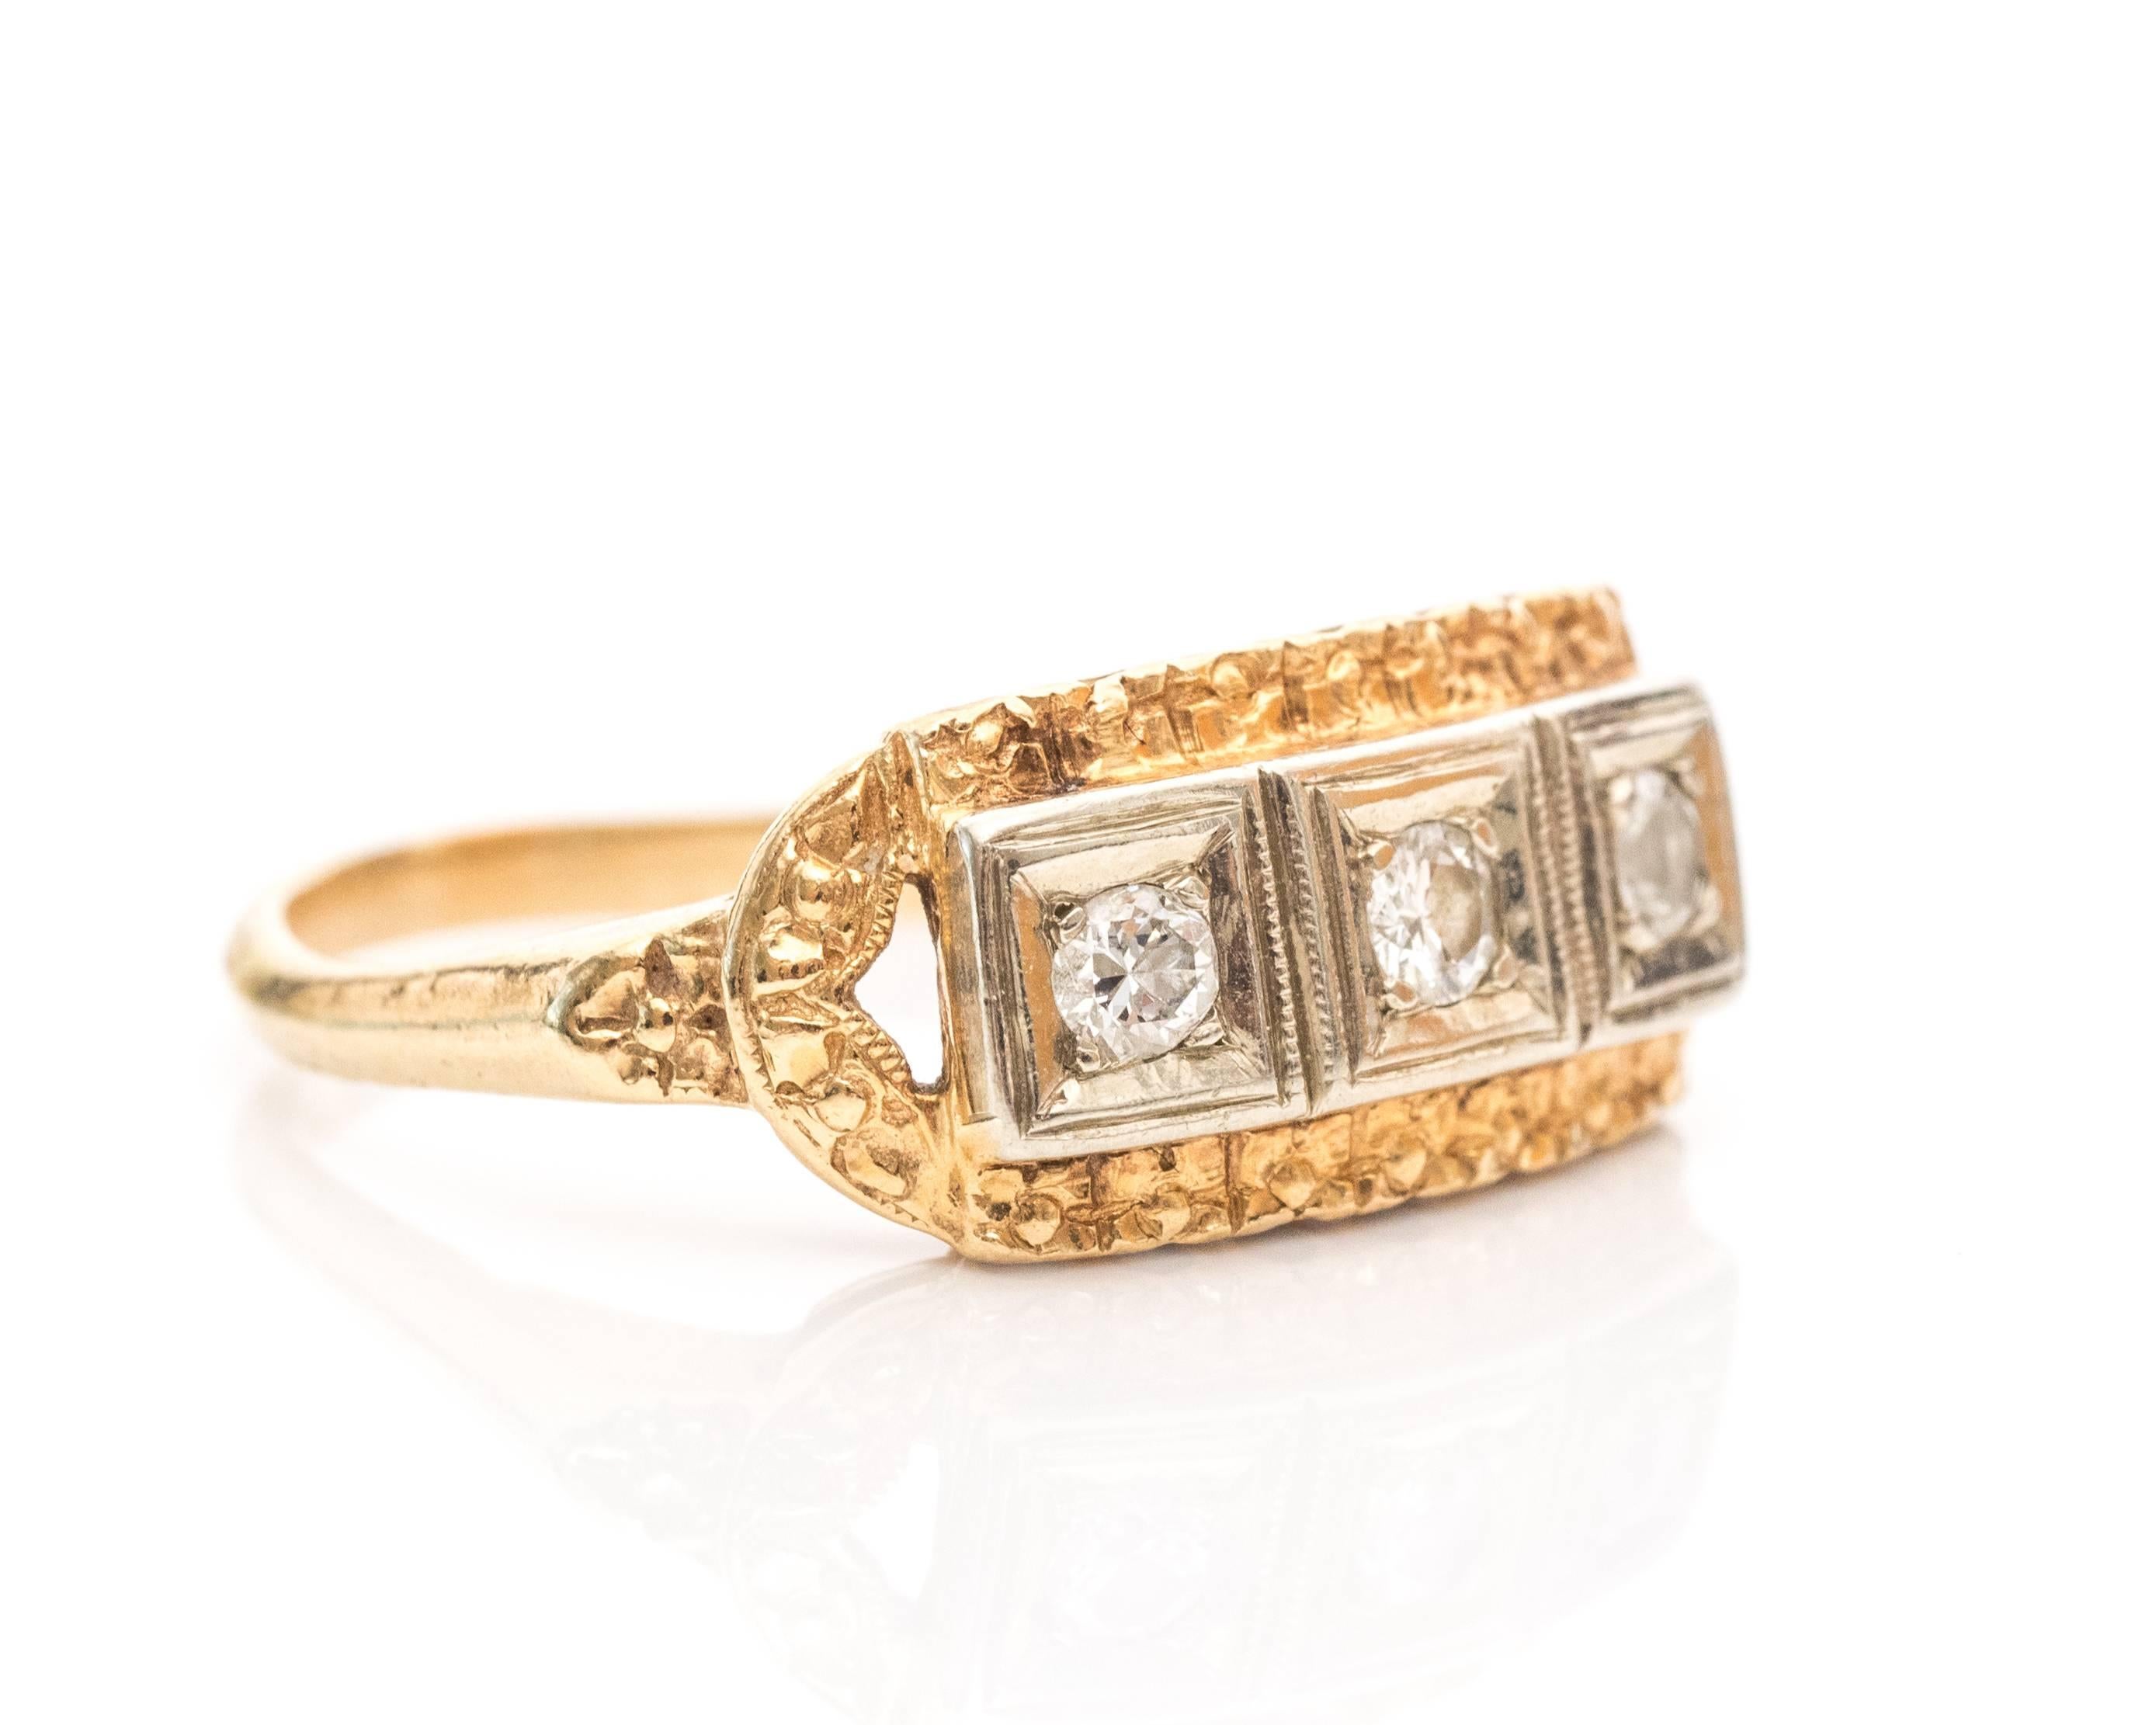 1920 Art Deco Three-Stone Diamond Two-Tone 14 Karat Gold Ring. This piece has three diamonds placed in a 14k white gold center. The white gold has milgrain patterns between each individual square shaped bezel frame. The diamonds total to .03 carats.